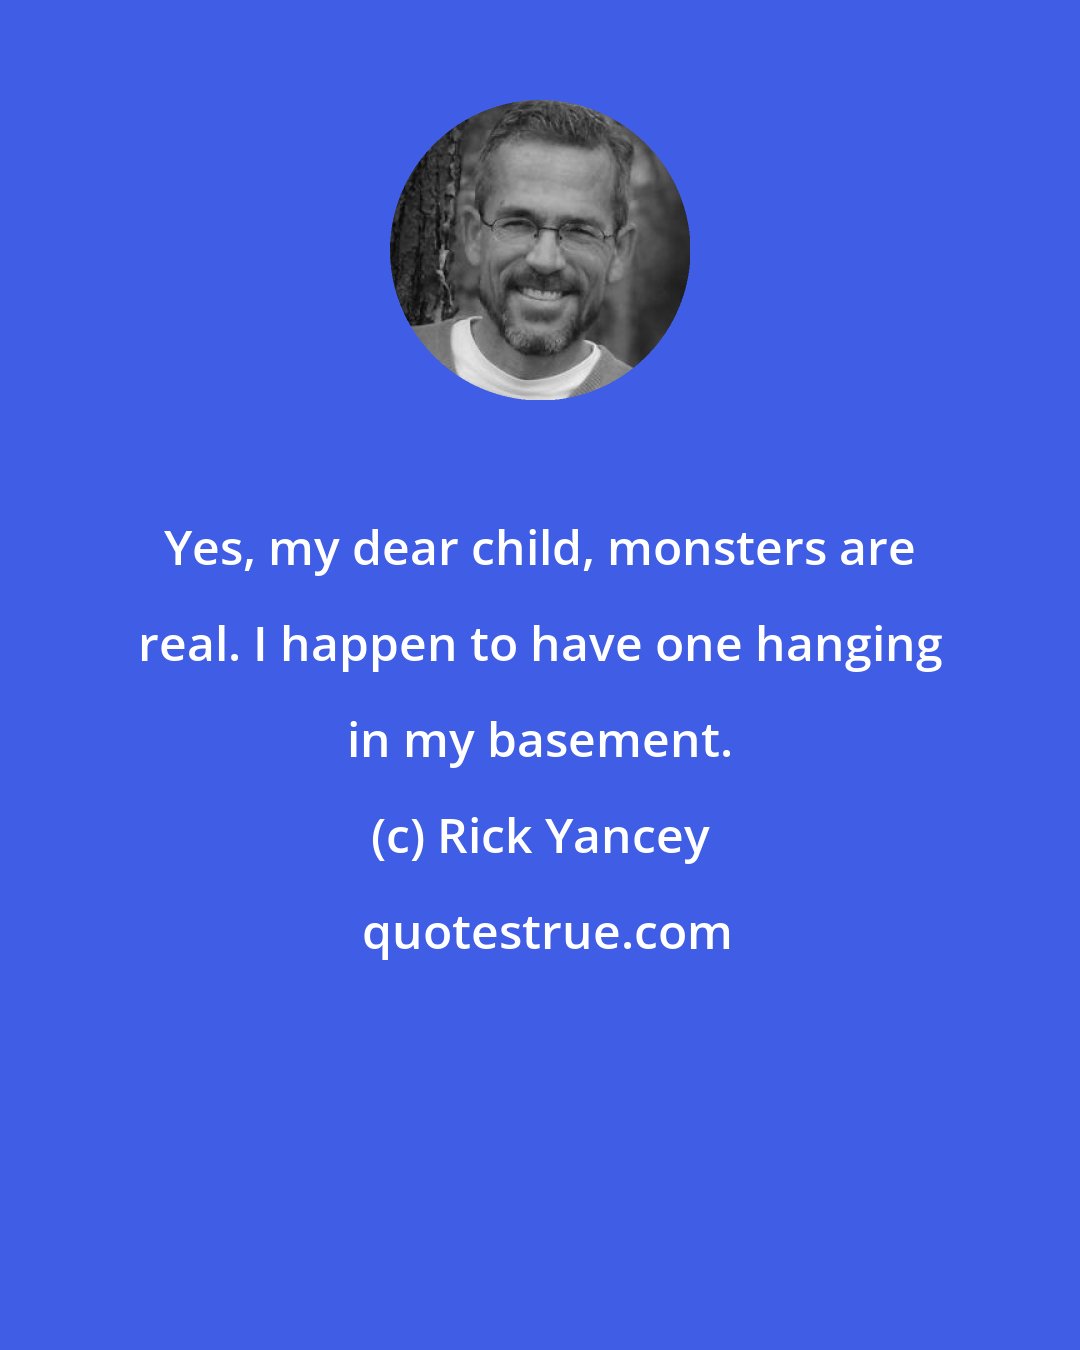 Rick Yancey: Yes, my dear child, monsters are real. I happen to have one hanging in my basement.